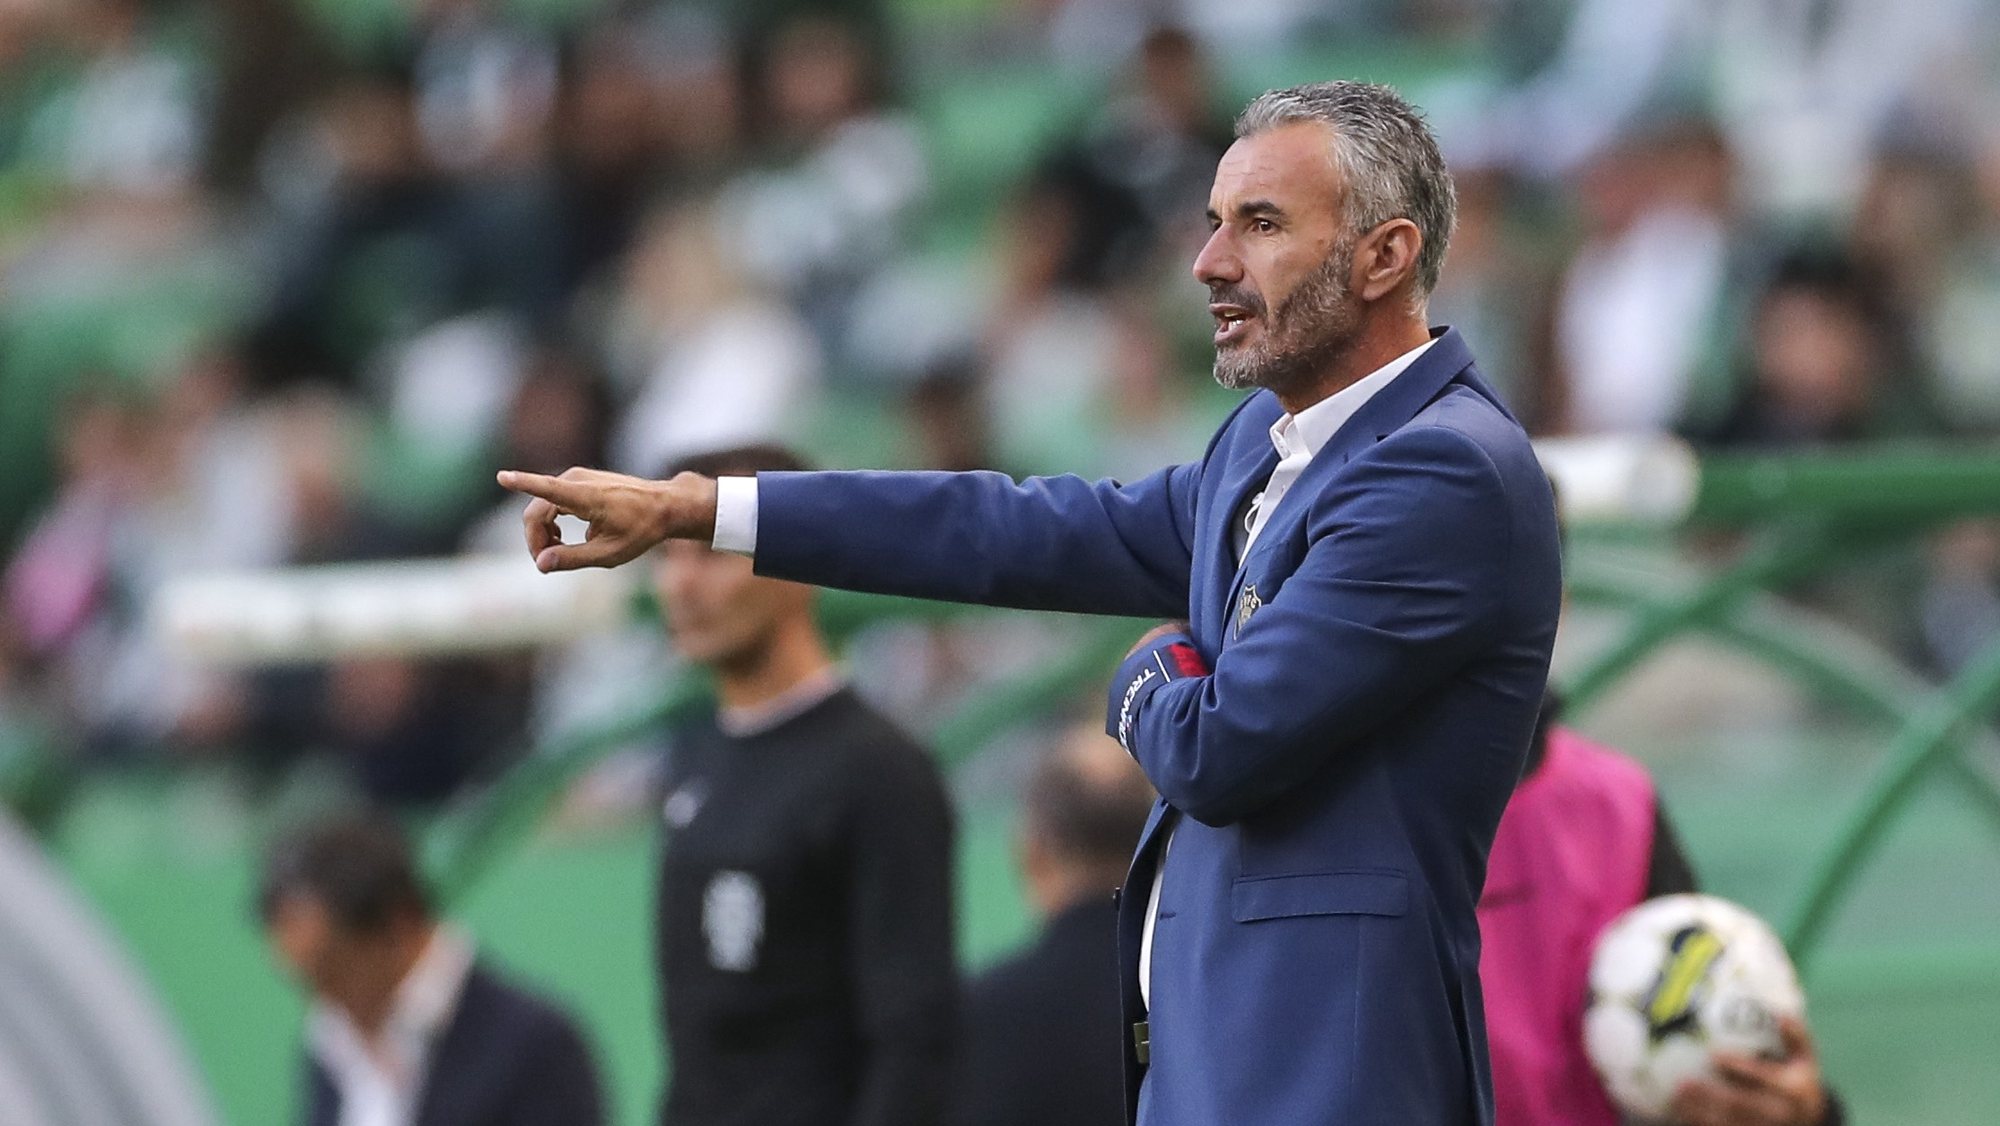 Gil Vicente head coach Ivo Vieira gives instructions to his players during the Portuguese First League soccer match against Sporting held at Alvalade stadium in Lisbon, Portugal, 30 September de 2022. MIGUEL A. LOPES/LUSA